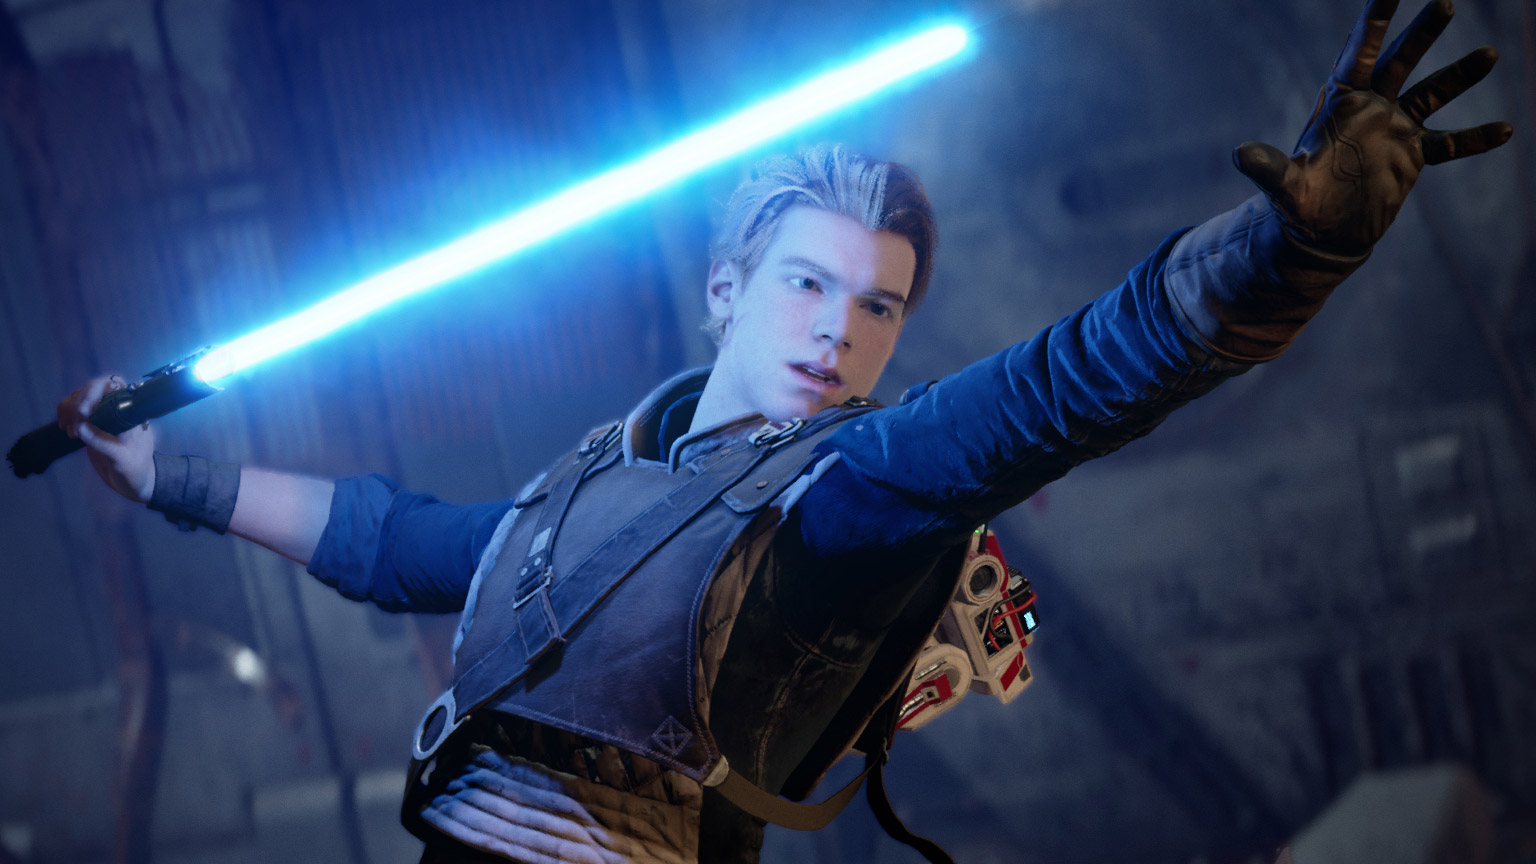 New Star Wars Jedi Fallen Order Live Action Trailer Encourages Players To “Become A Jedi” One Day Before The Game Releases